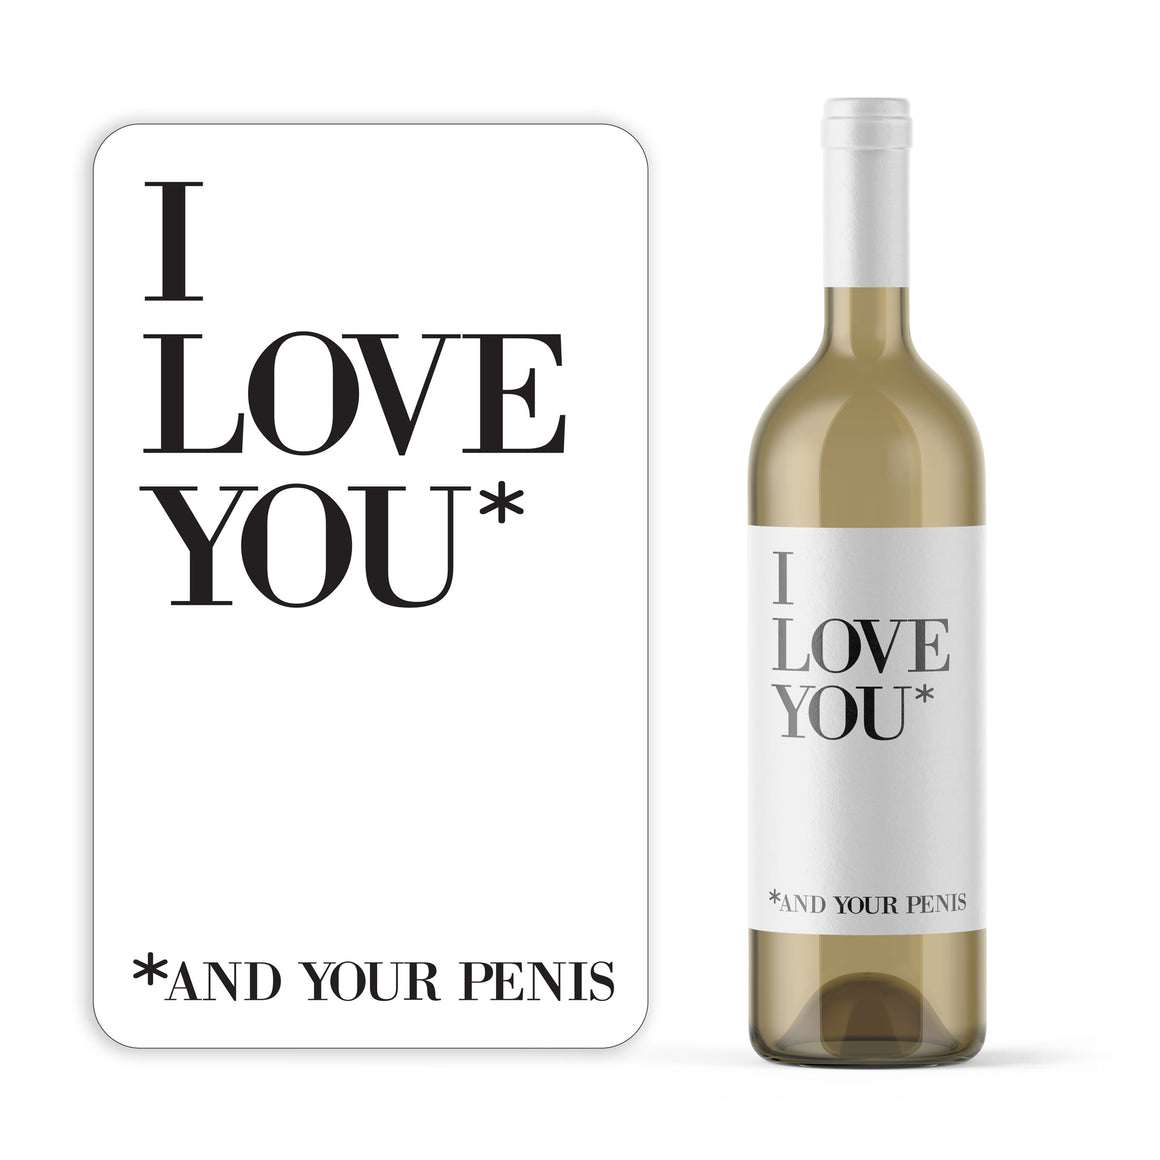 Naughty Valentine's Day Wine Label + Card for Him